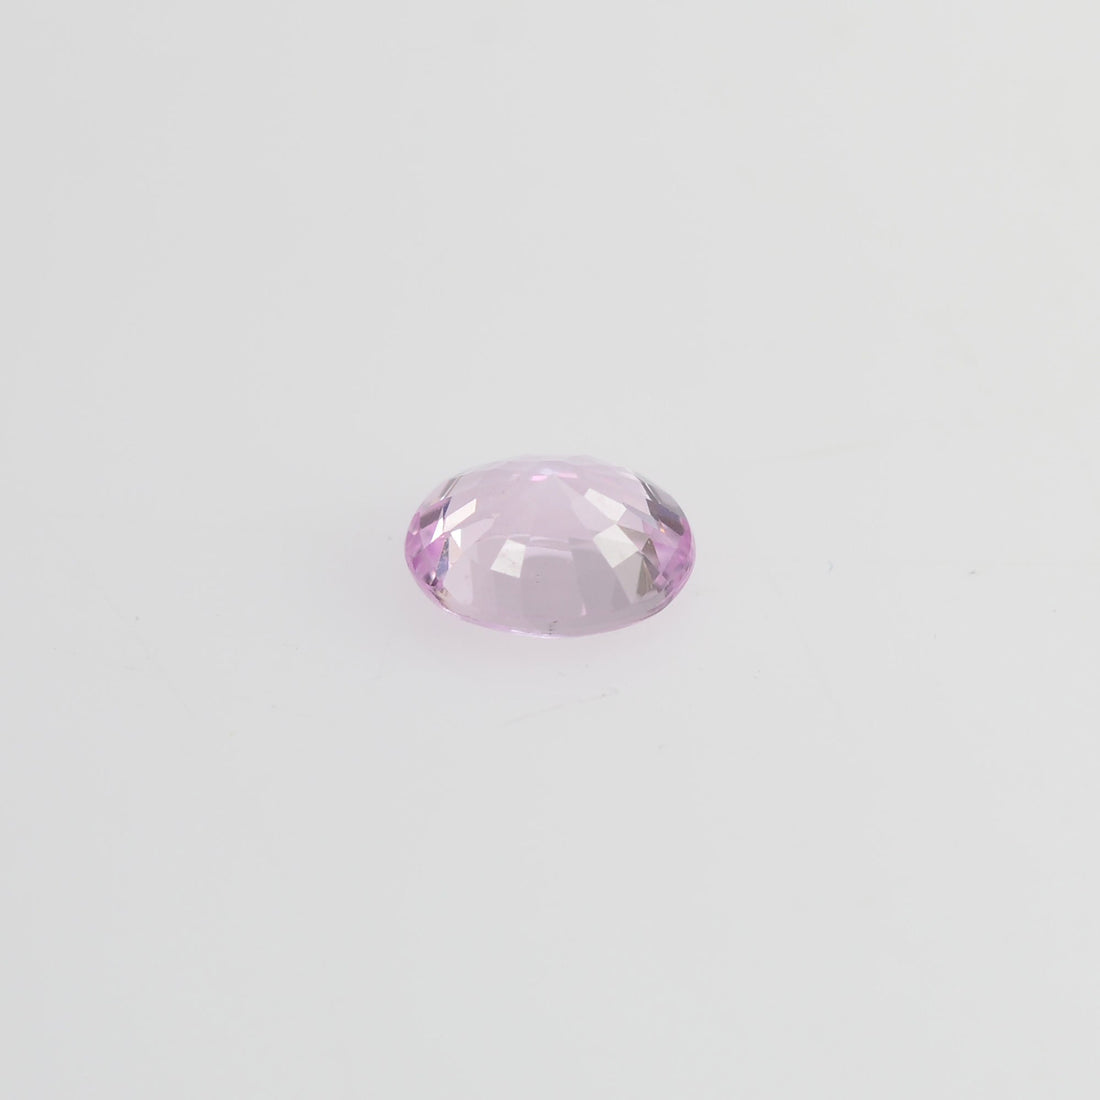 0.25 cts Natural Pink Sapphire Loose Gemstone oval Cut